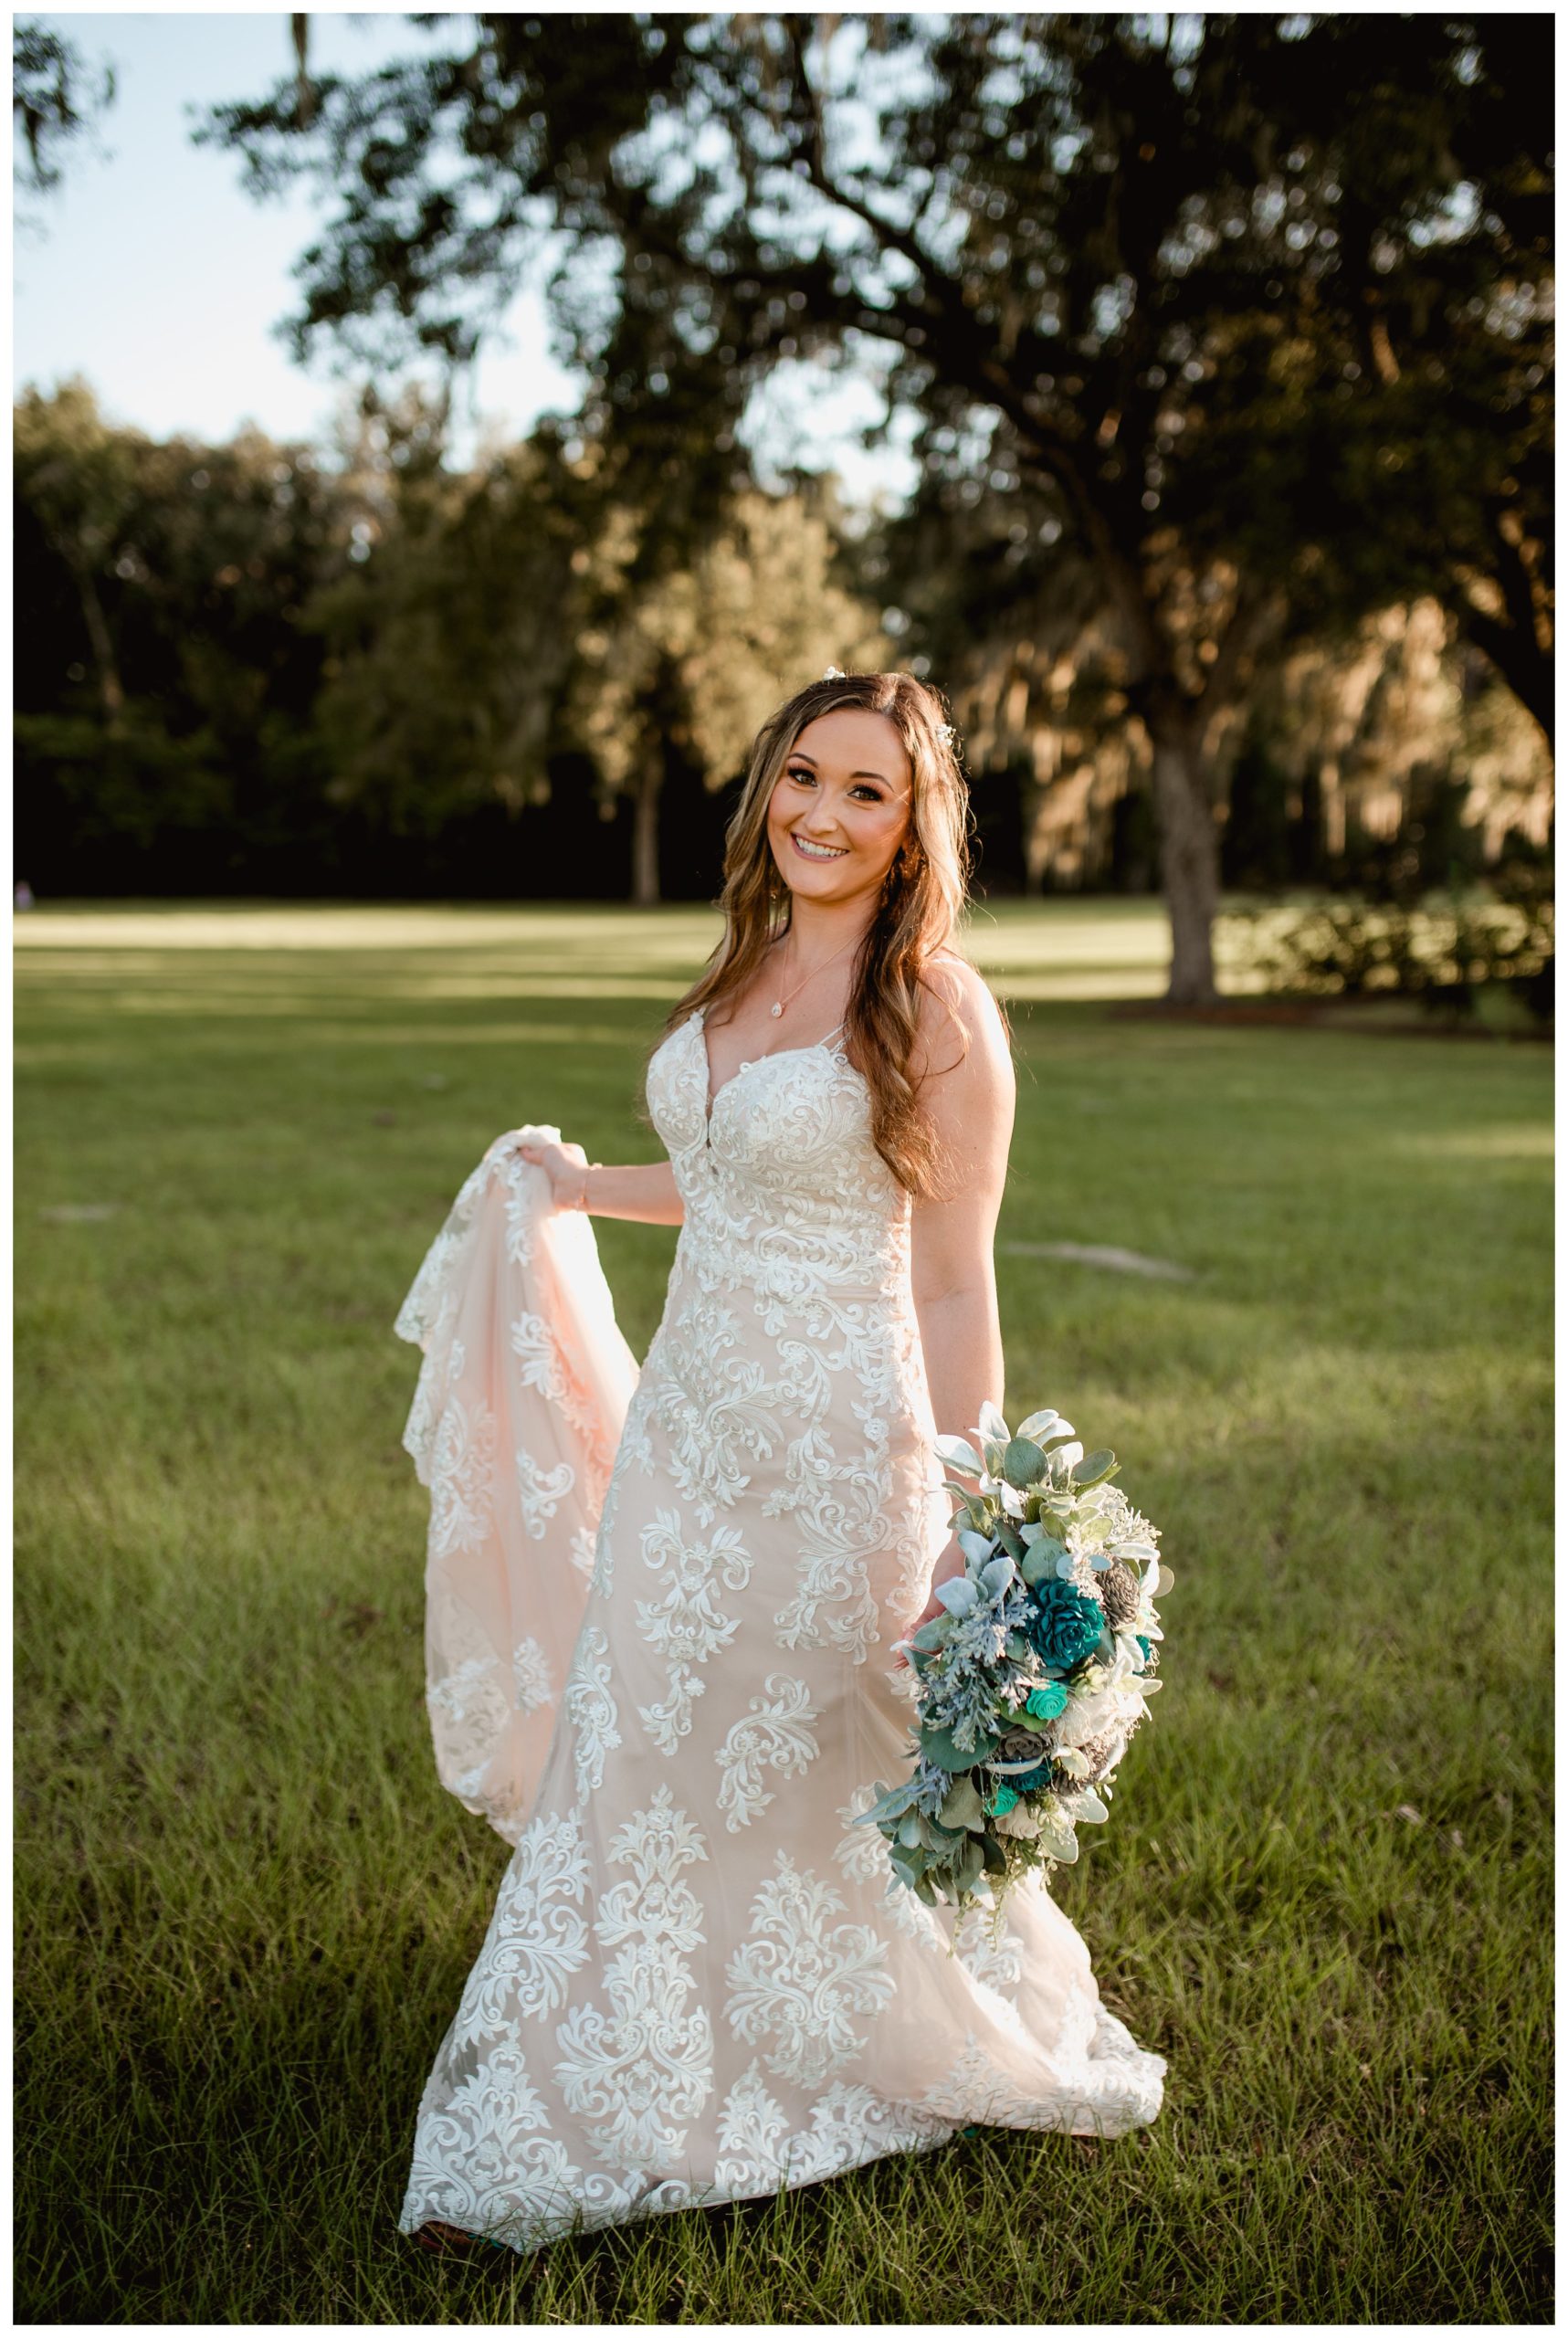 Natural photo of the bride on her wedding day in Florida.